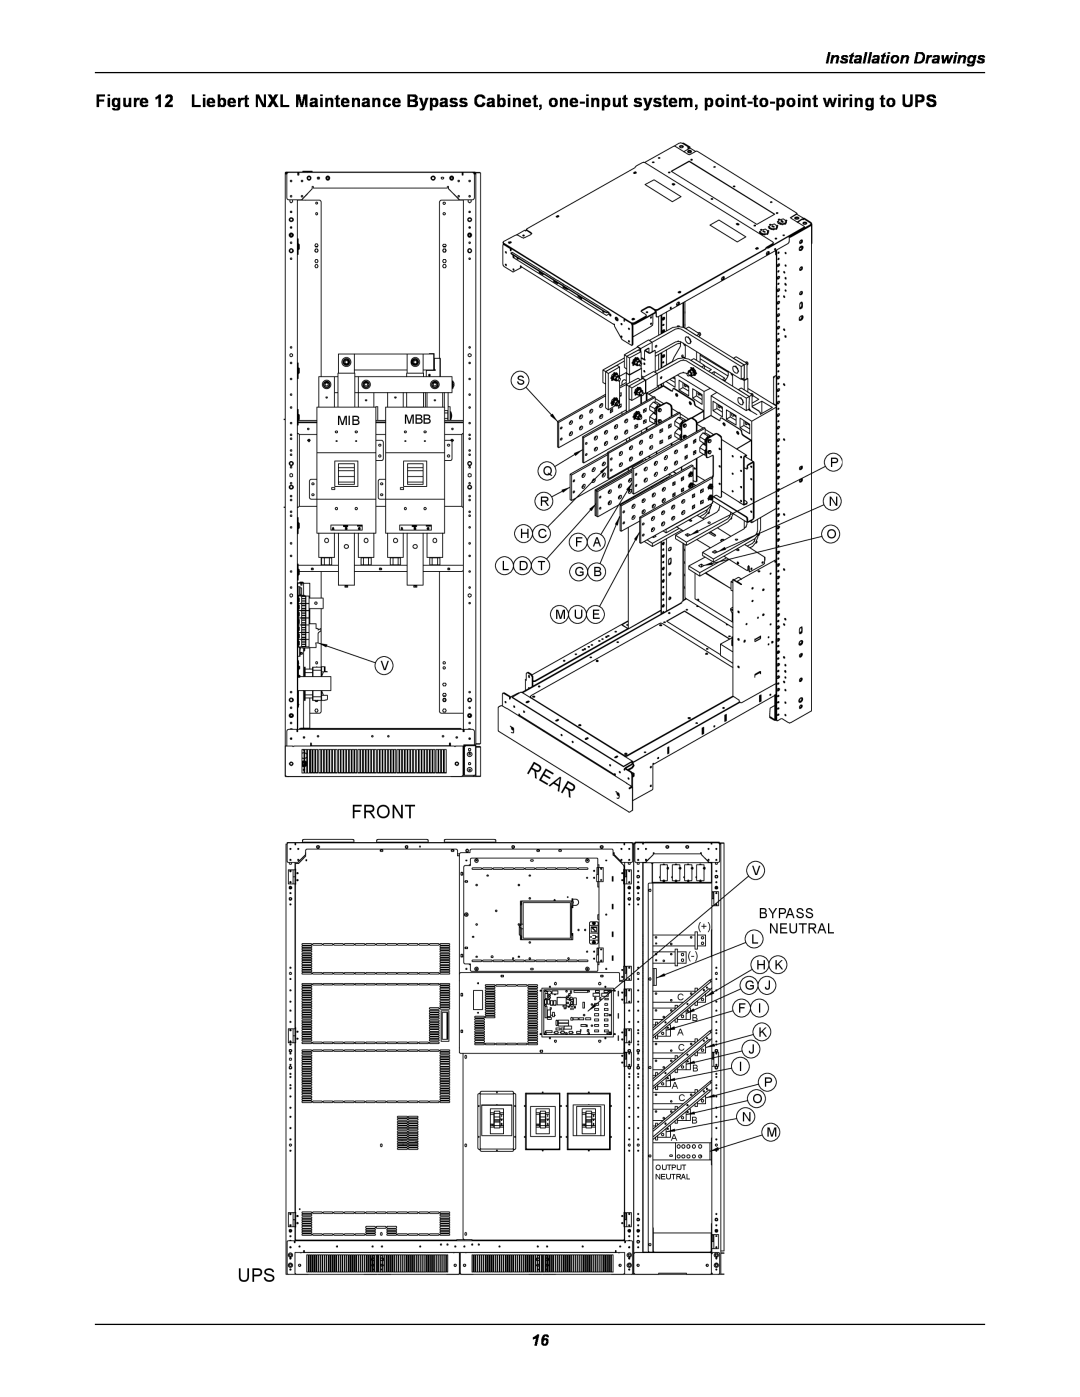 Emerson UPS Systems installation manual Front, Installation Drawings, Bypass, Neutral 